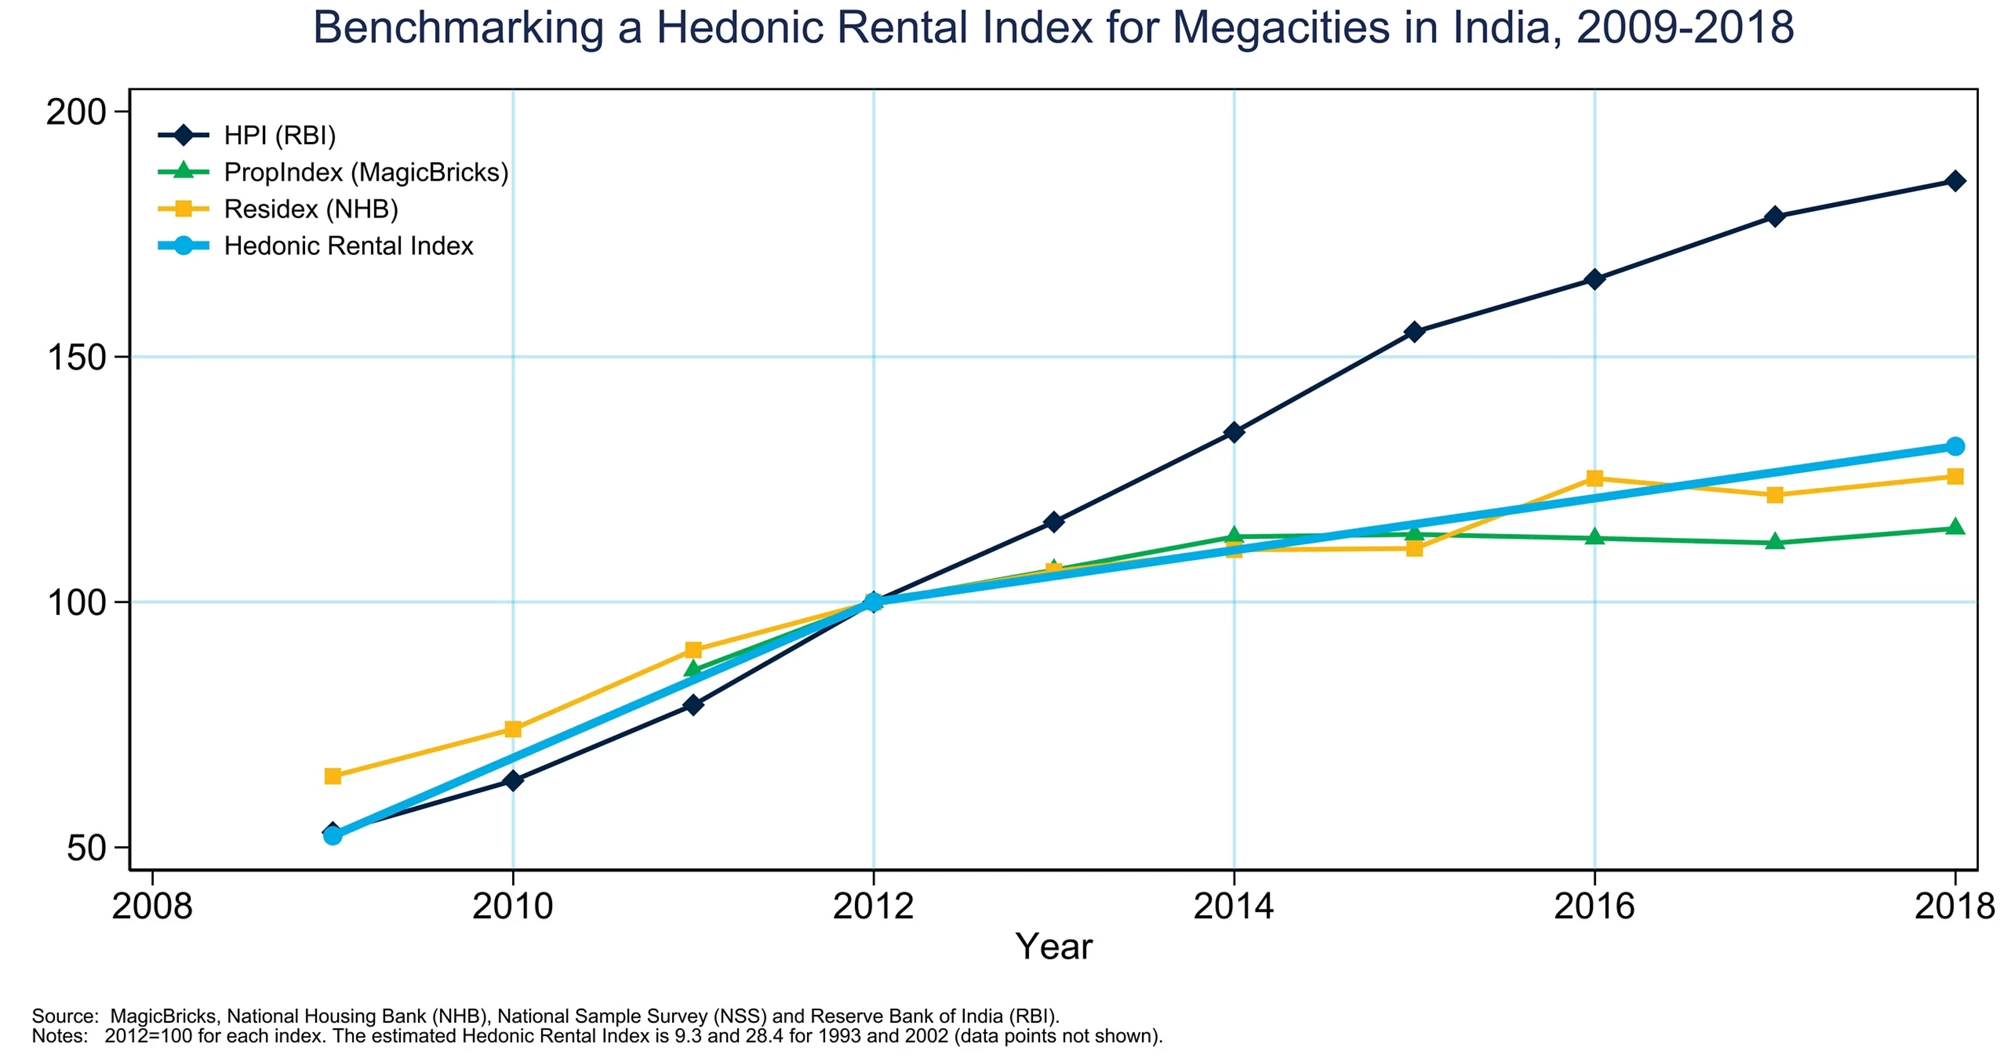 Rental Index for Indian Megacities